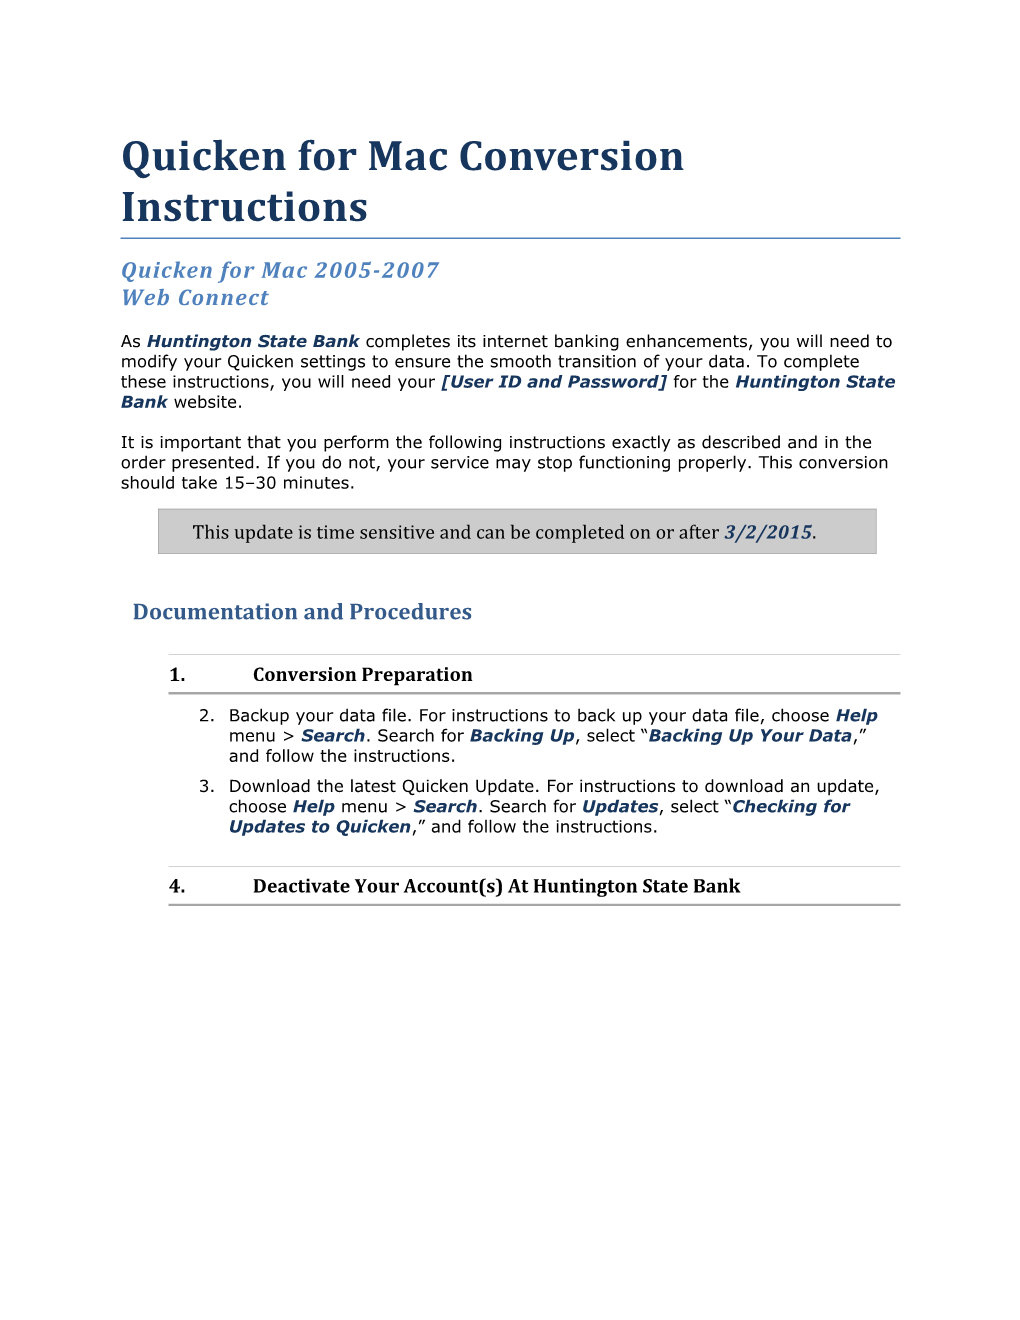 Quicken for Mac Conversion Instructions s2